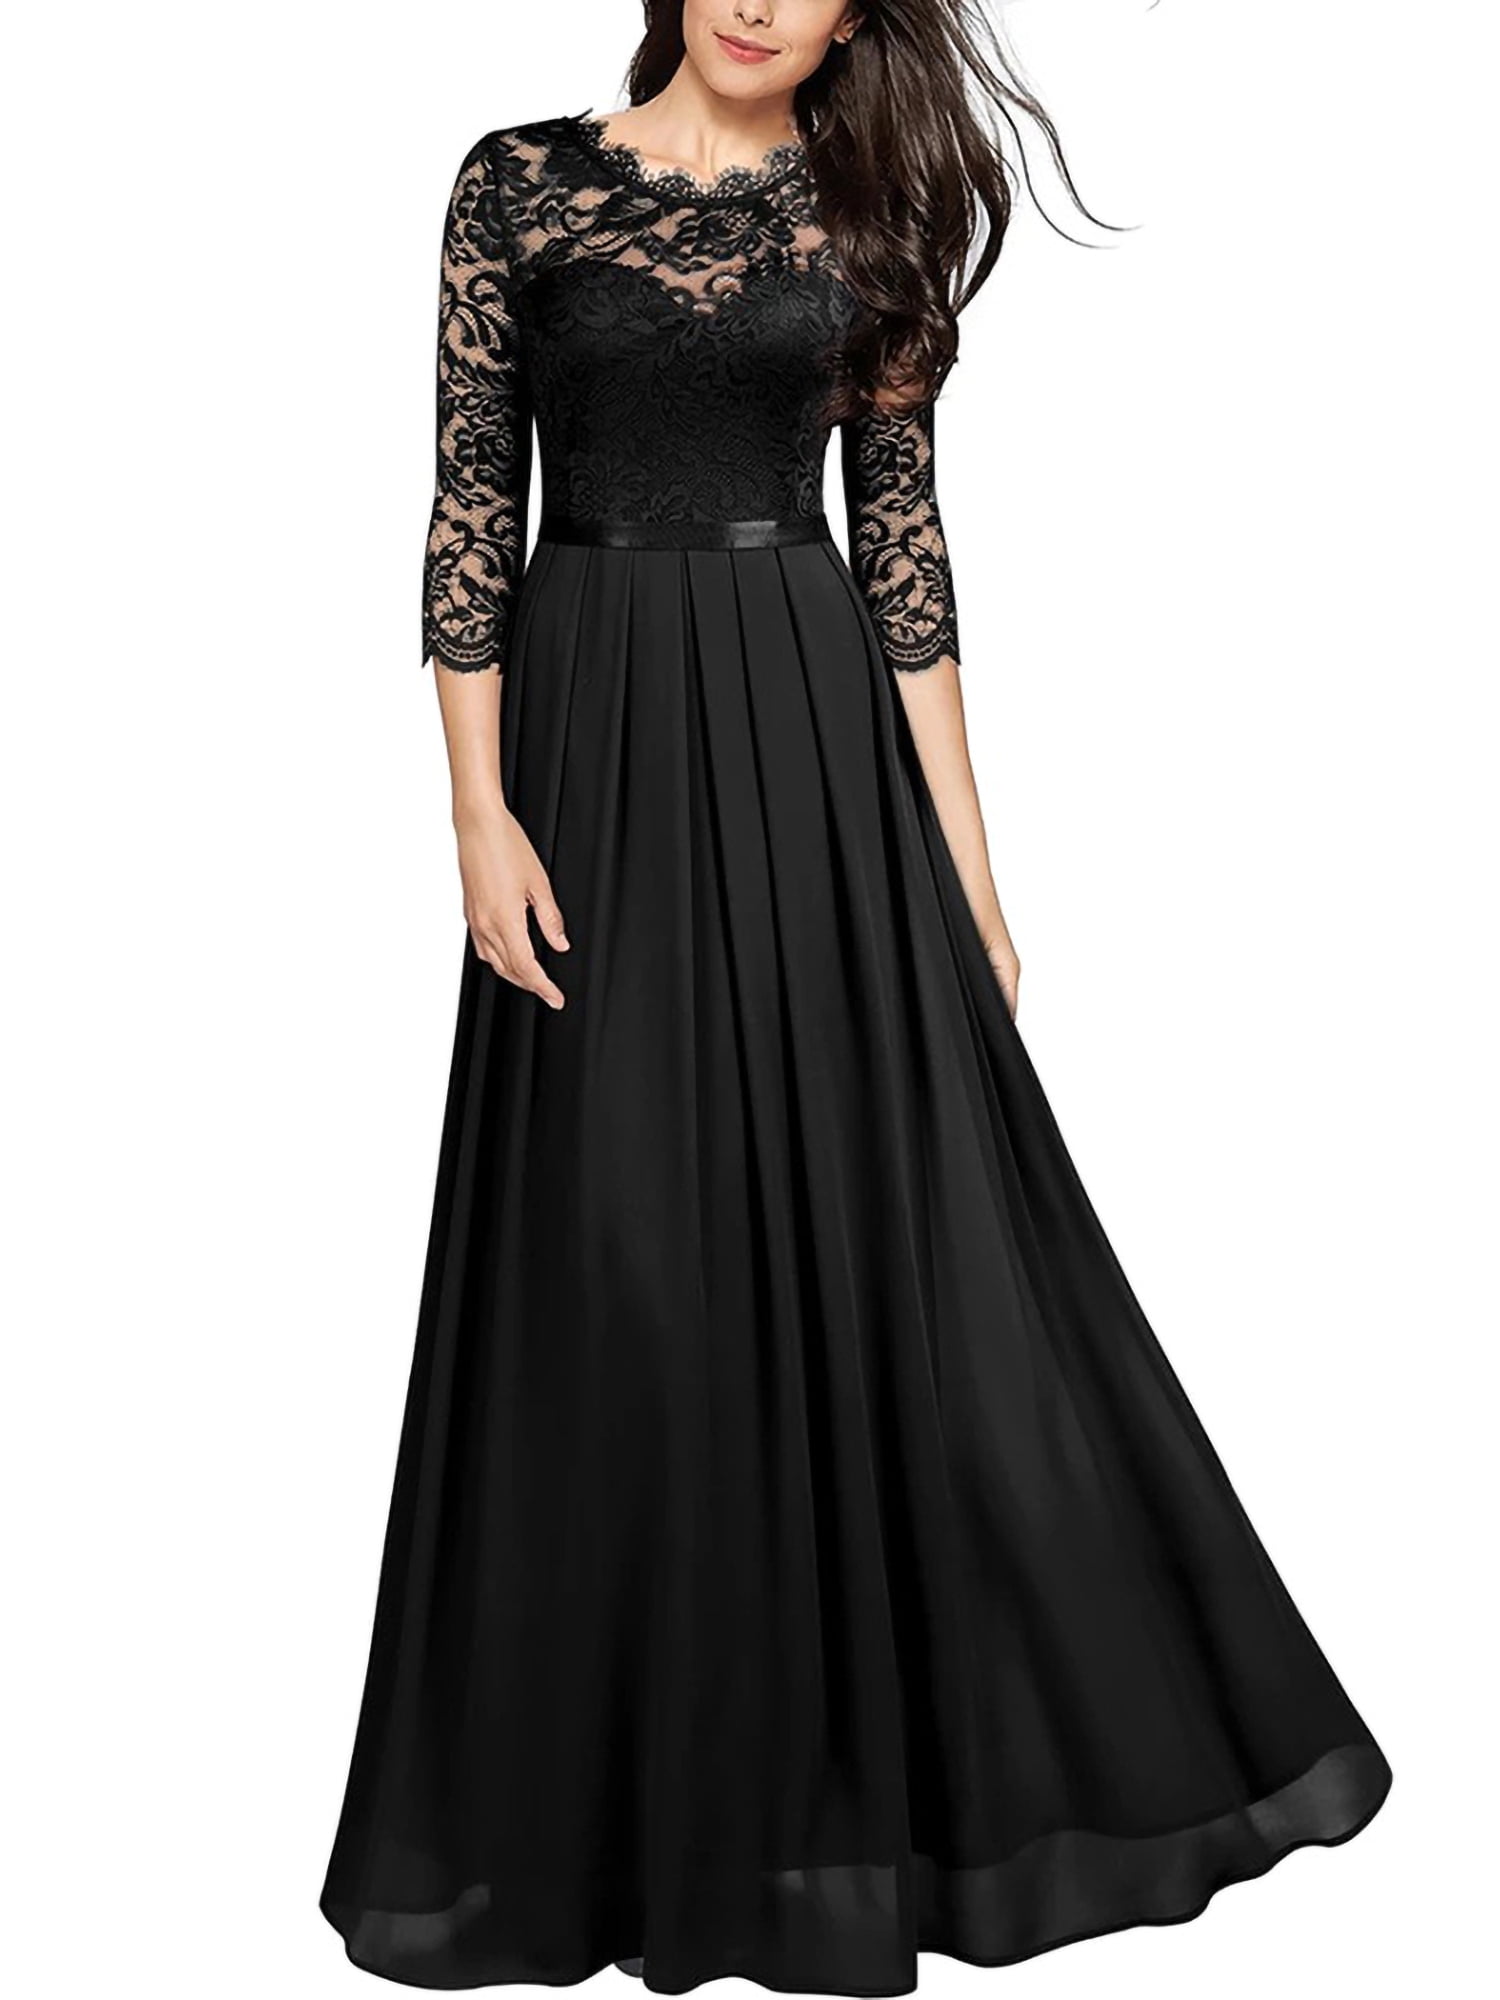 Womens Bridesmaid Lace Chiffon Long Dress Ladies Evening Party Formal Prom Gown 